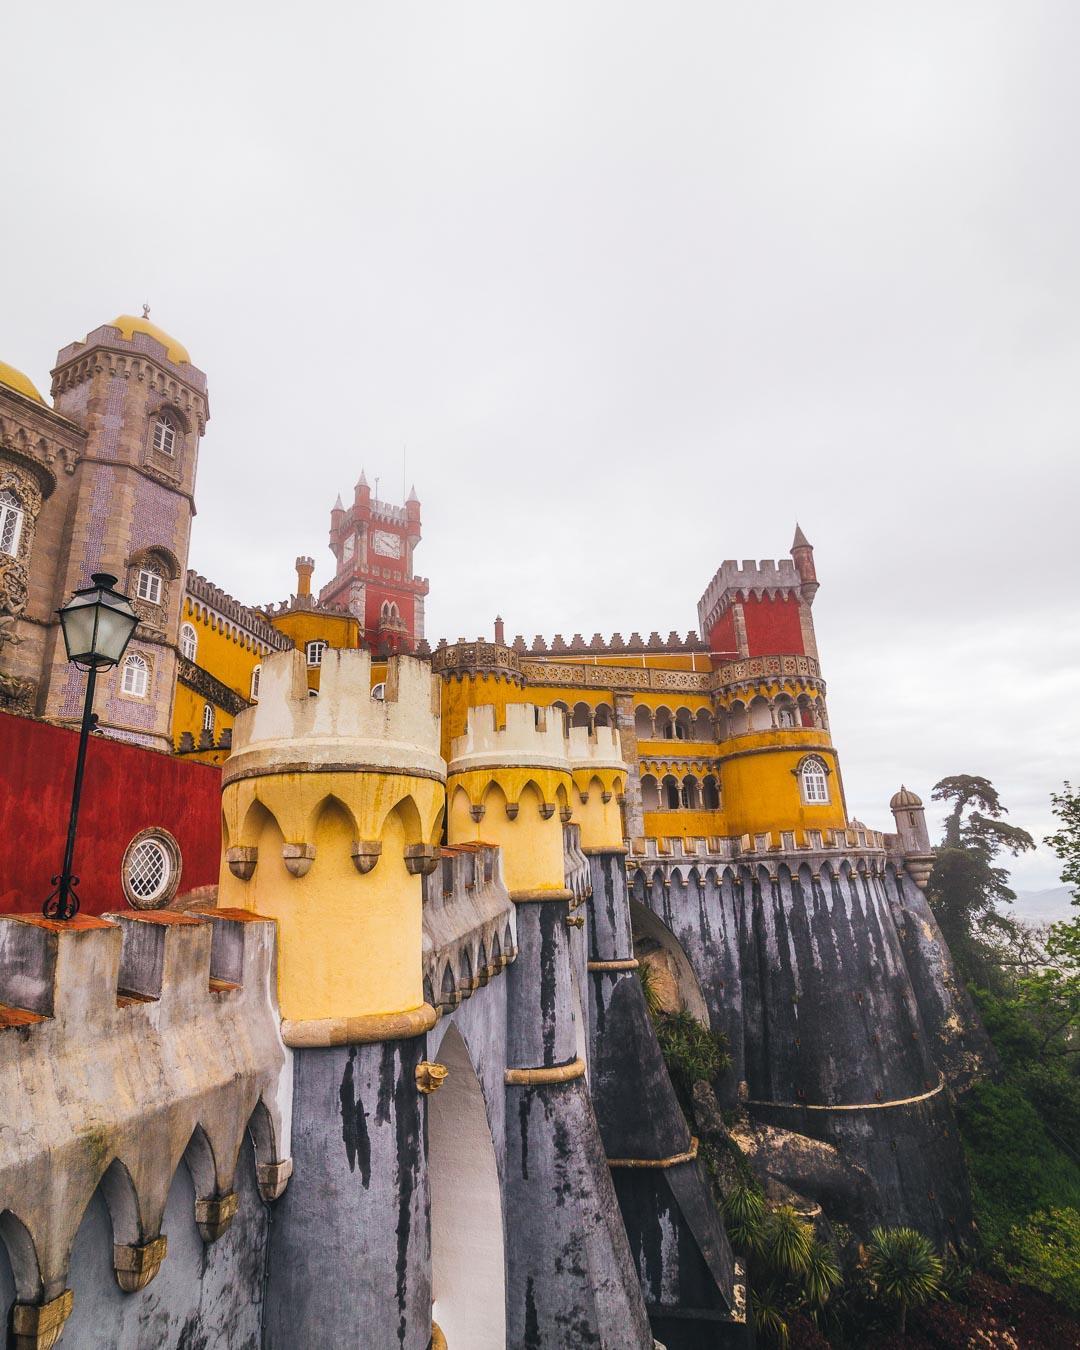 pena palace from the side